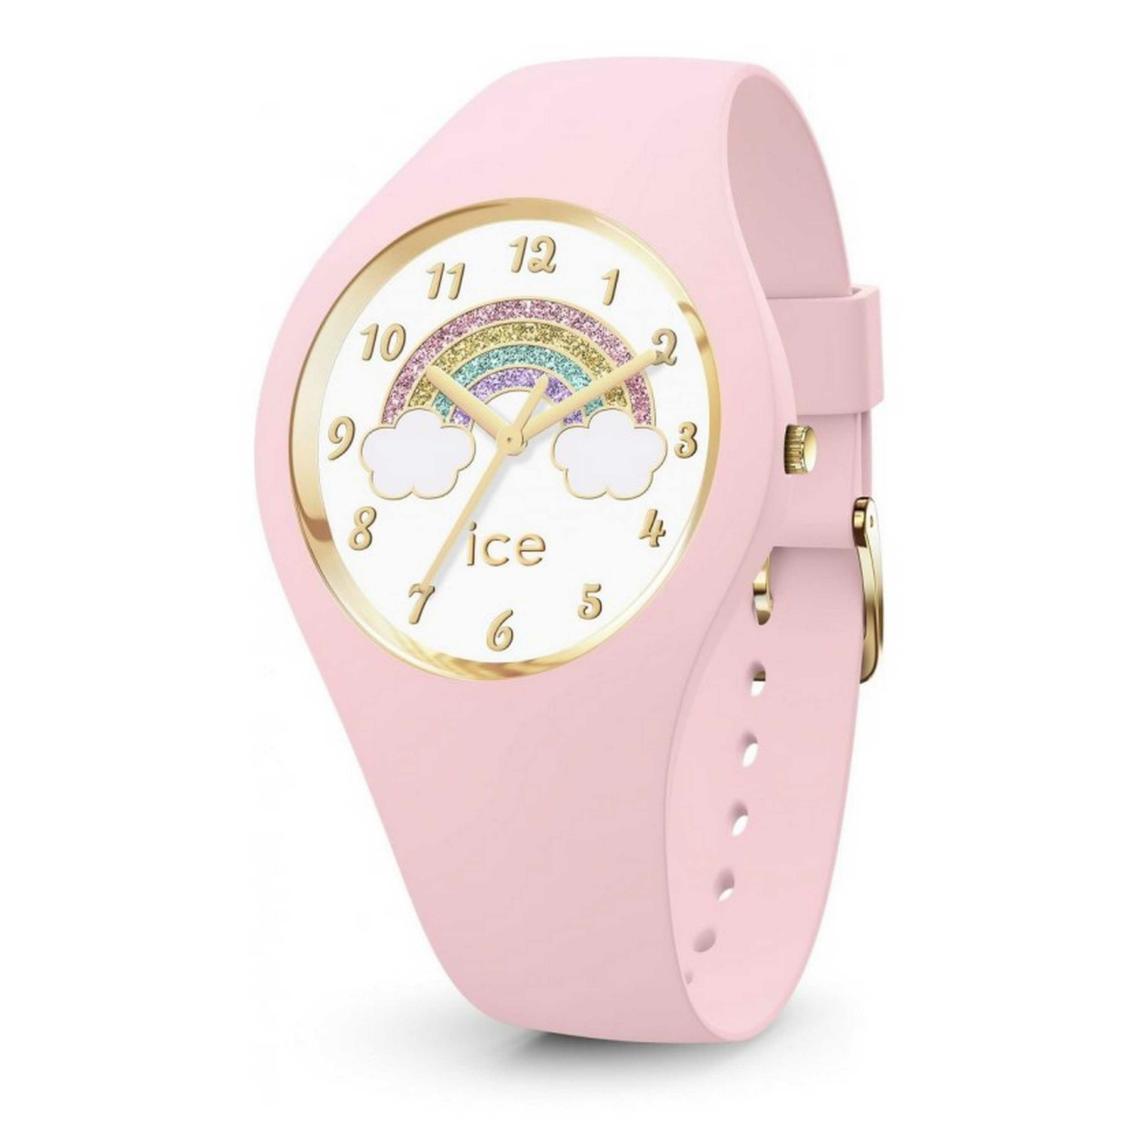 Montre Ice Watch Fantasia Rainbow pink Small 017890 - Bracelet en Silicone Rose